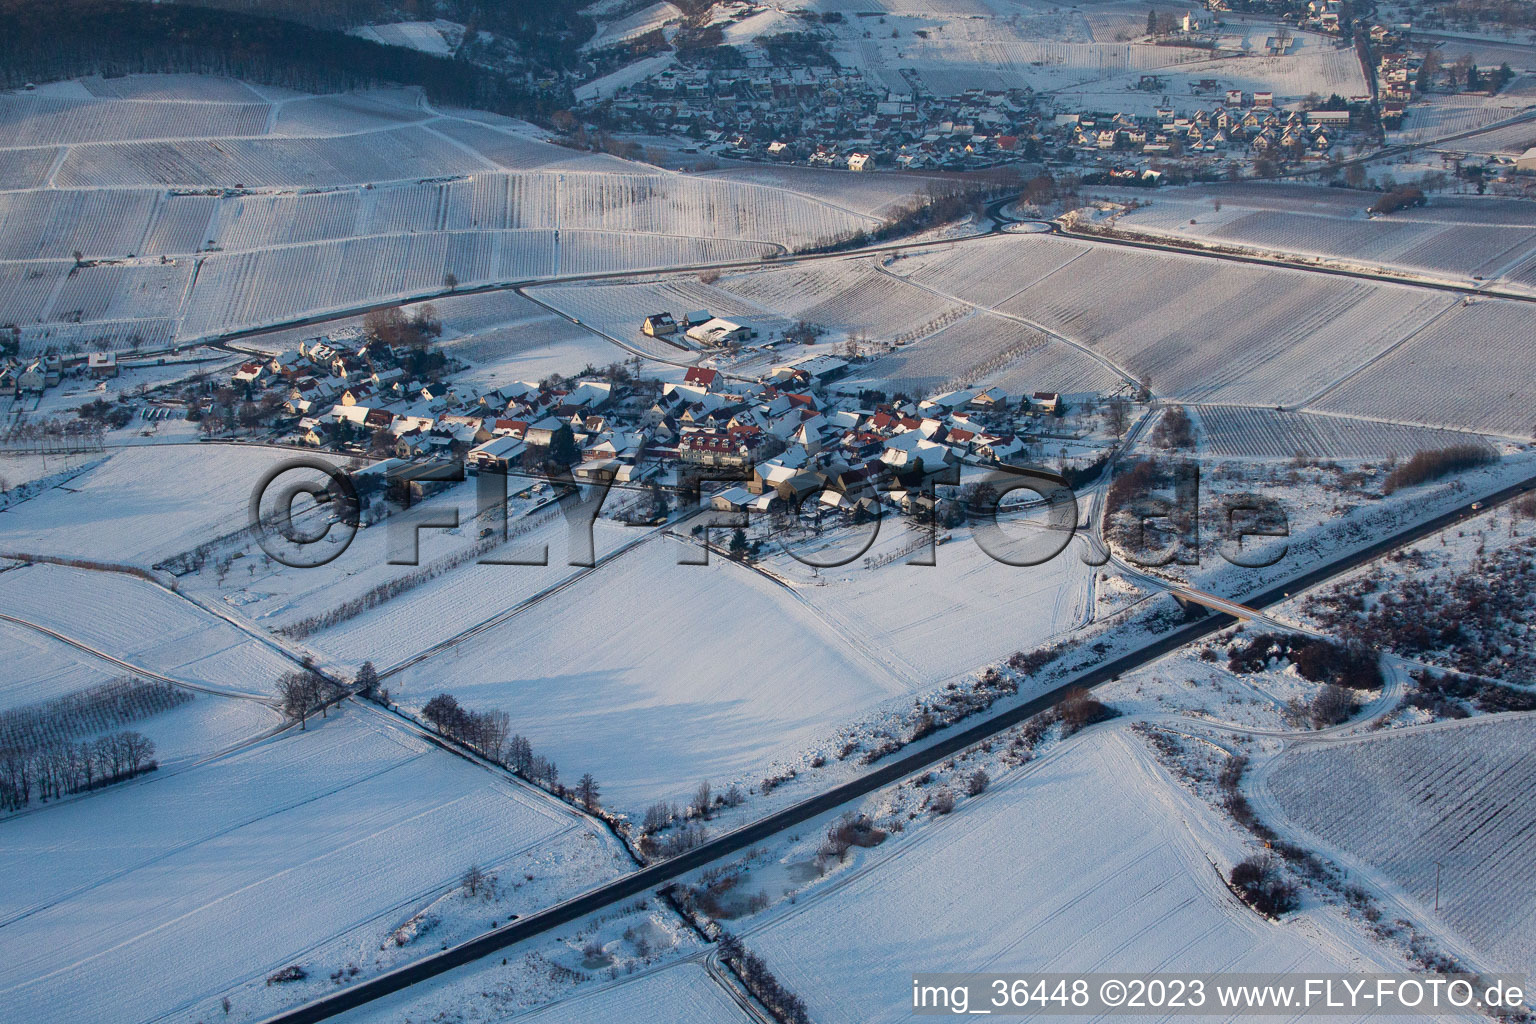 Aerial view of In winter in the district Oberhofen in Pleisweiler-Oberhofen in the state Rhineland-Palatinate, Germany